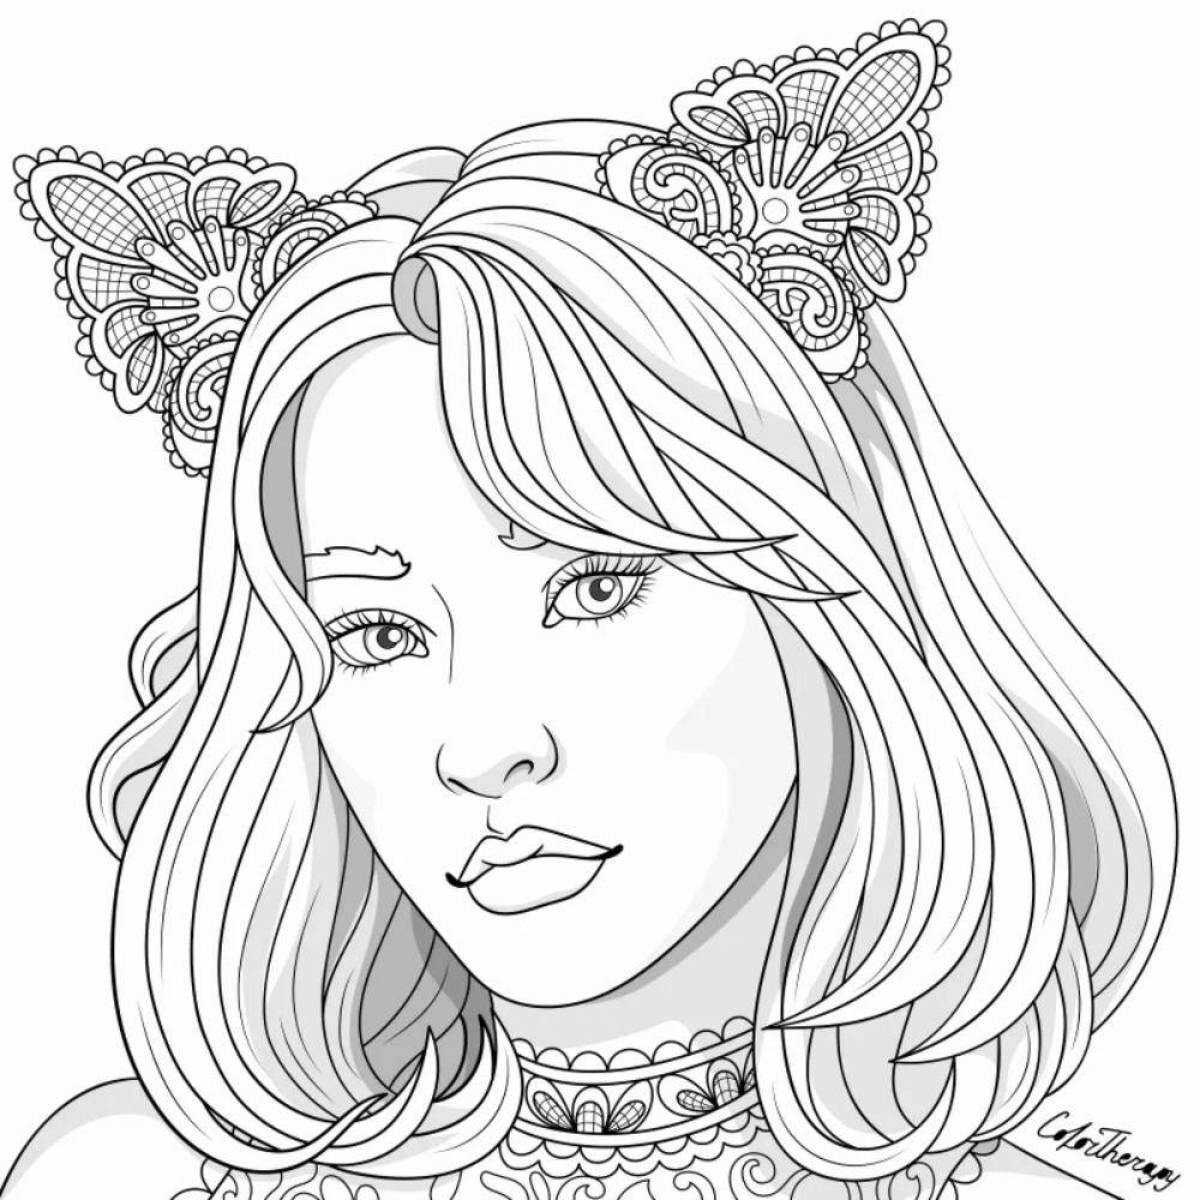 Creative coloring pages for 12 year olds